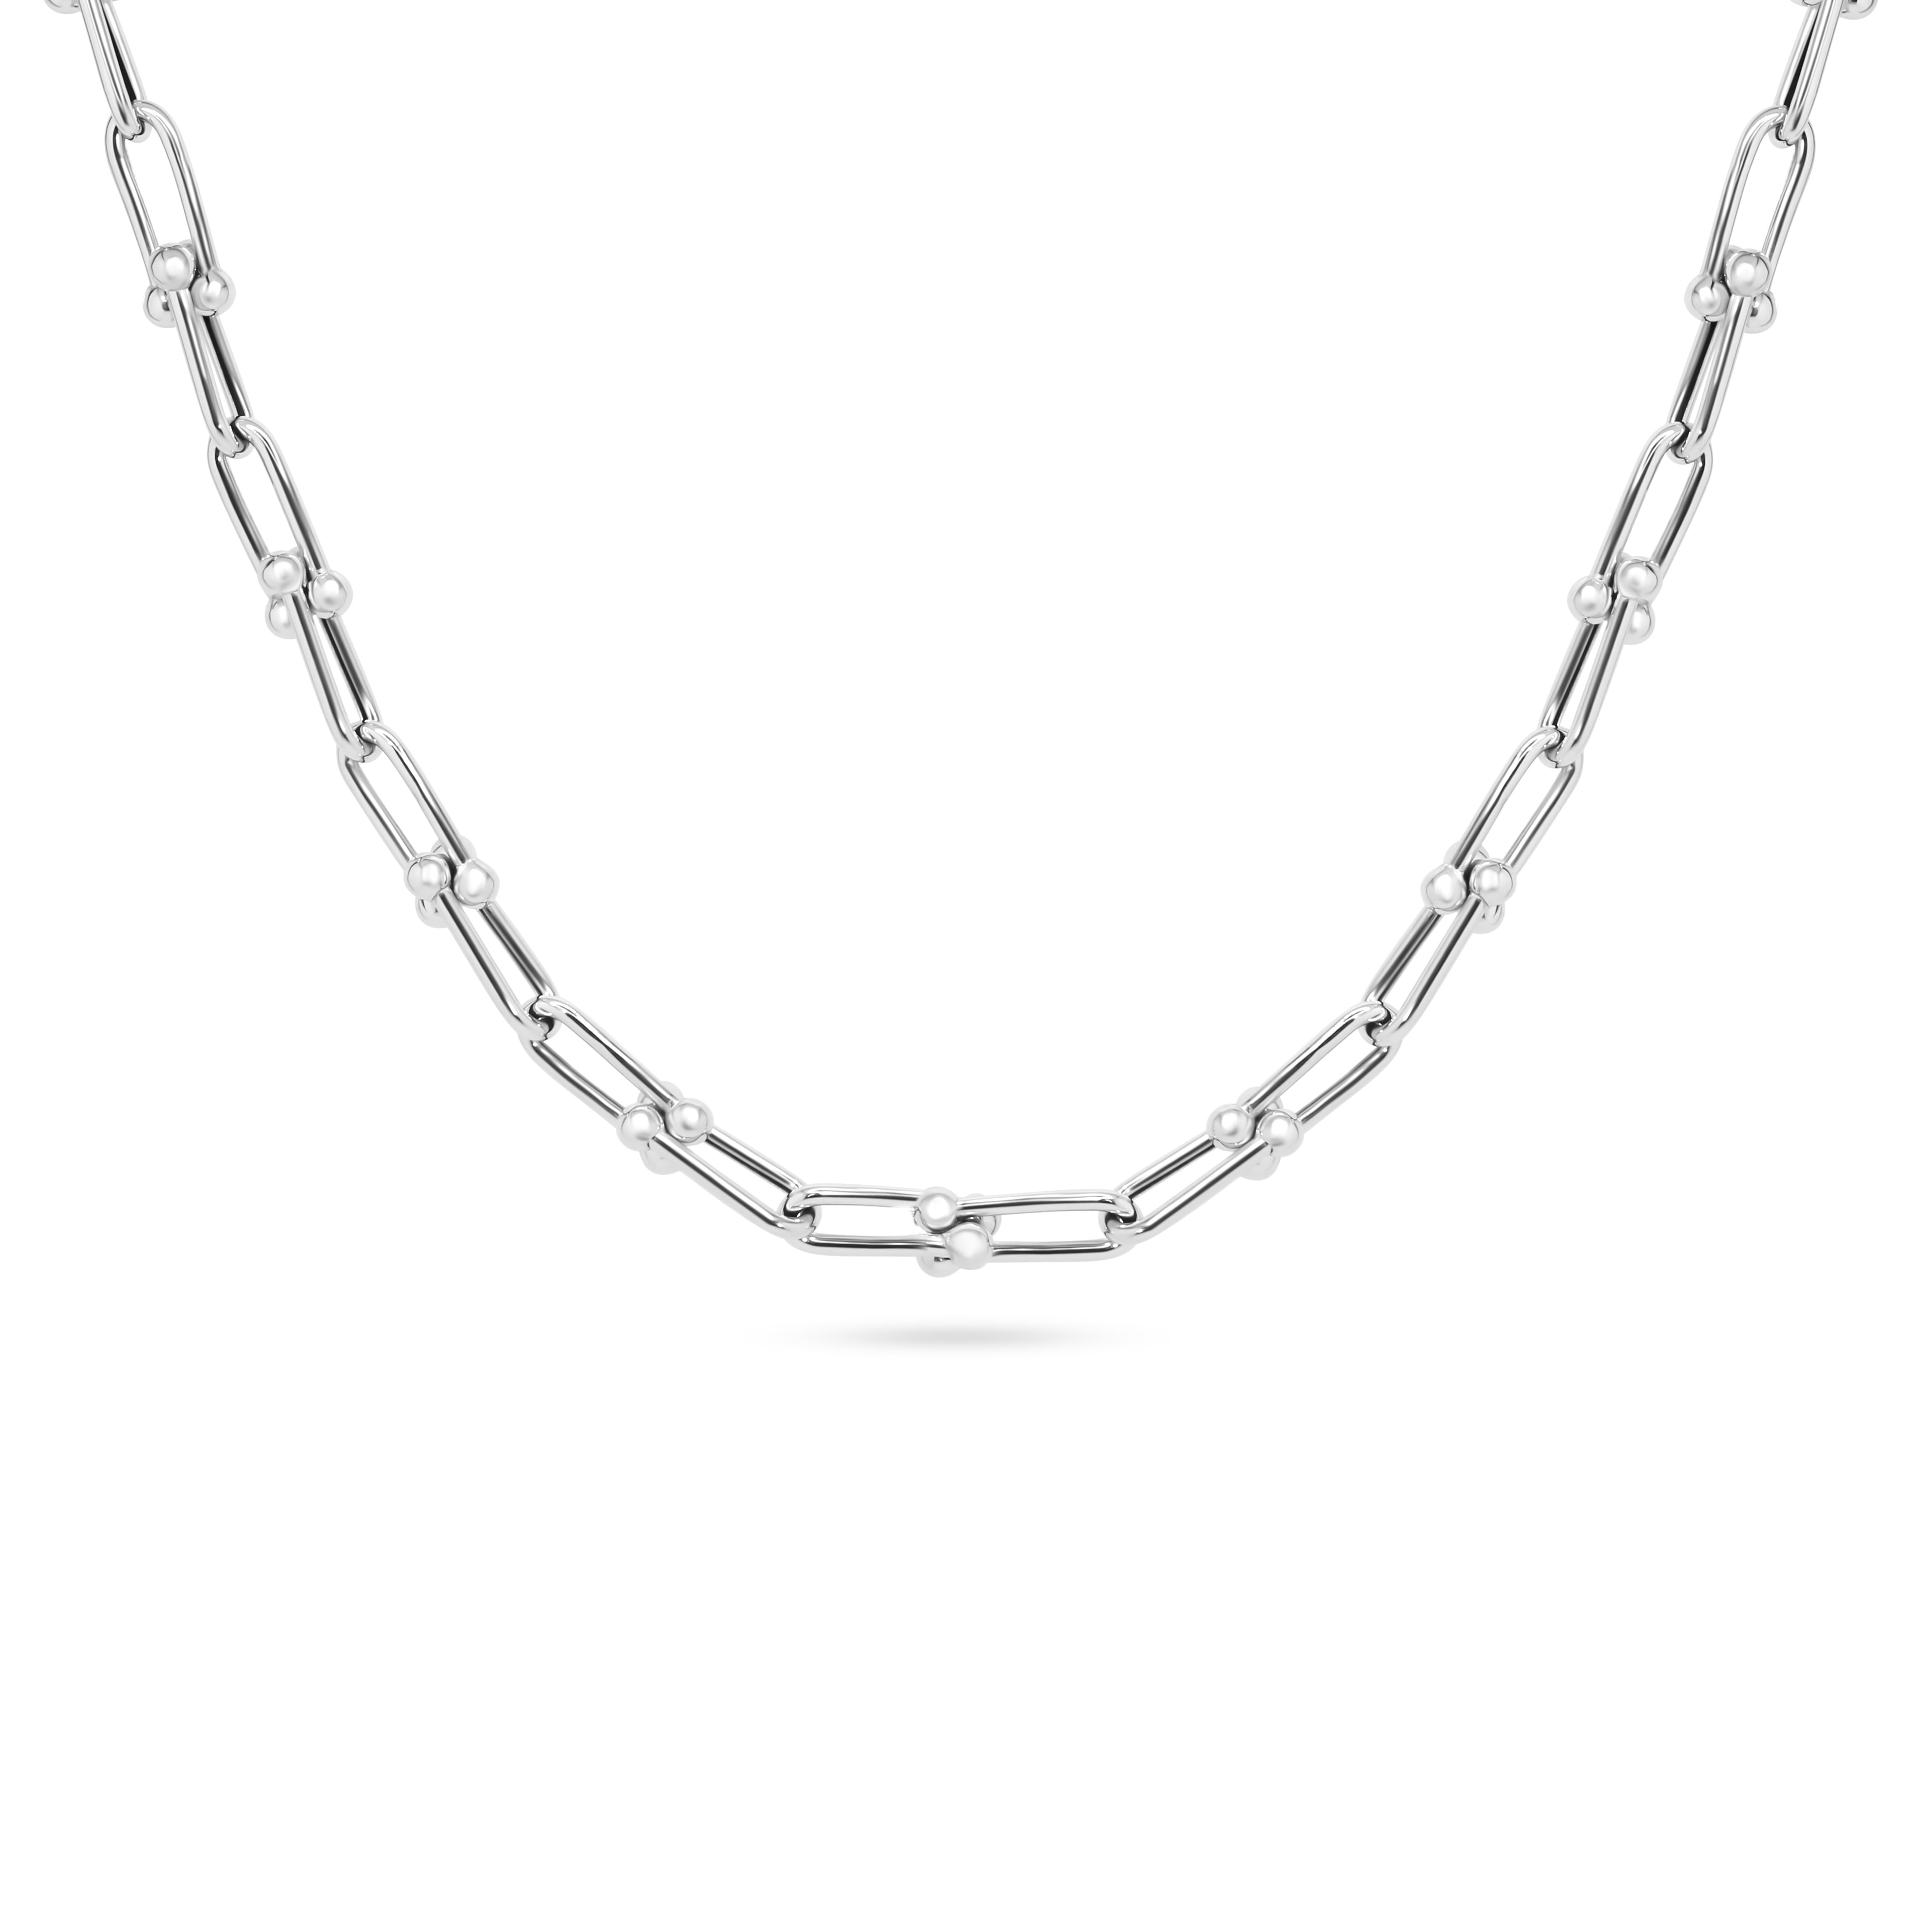 U-link Chain White Gold Necklace